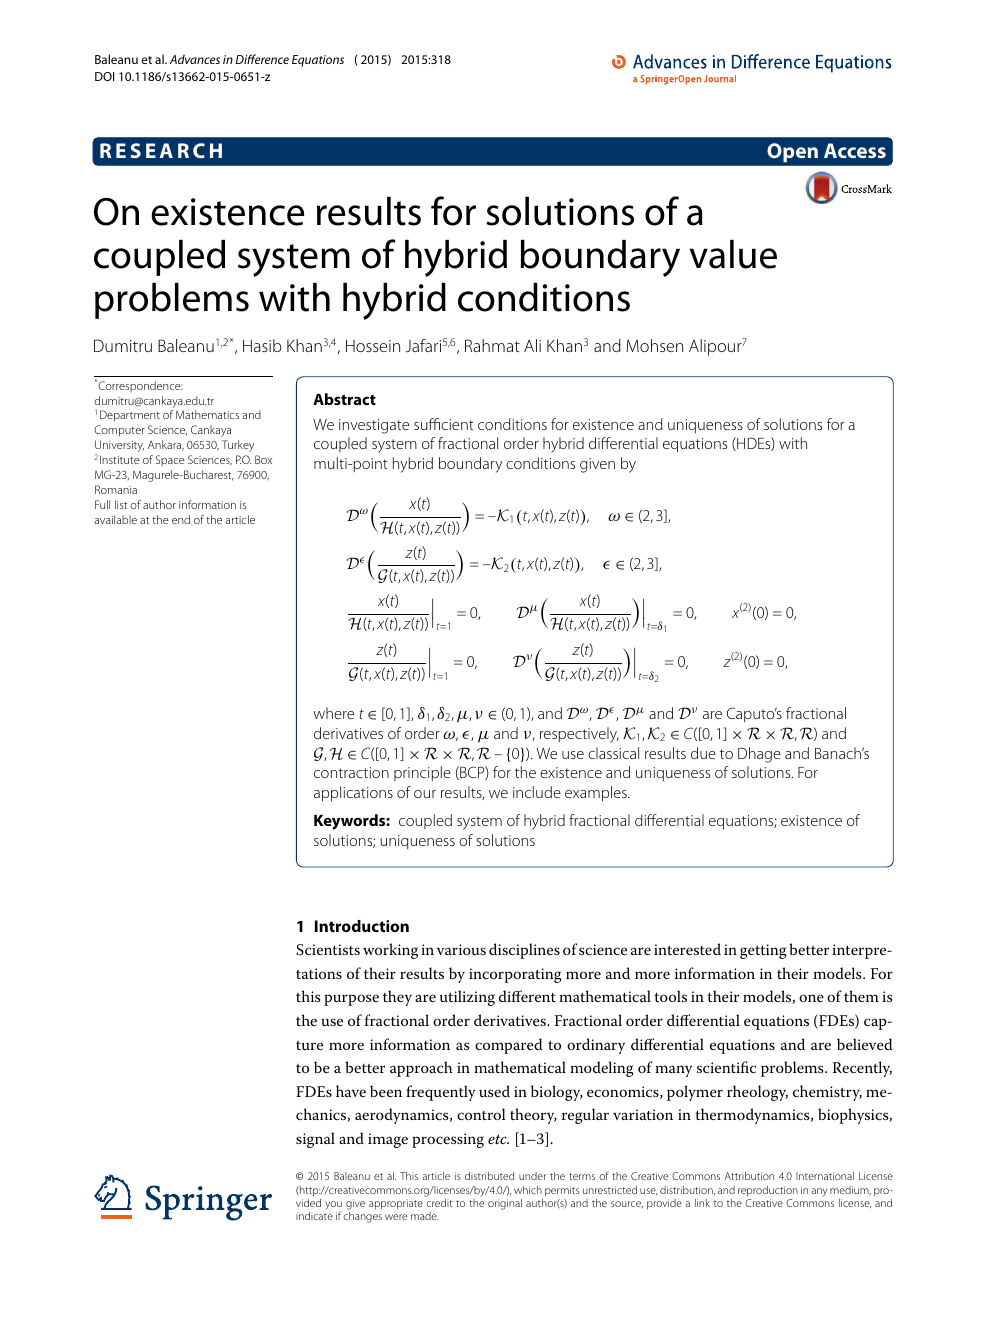 On Existence Results For Solutions Of A Coupled System Of Hybrid Boundary Value Problems With Hybrid Conditions Topic Of Research Paper In Mathematics Download Scholarly Article Pdf And Read For Free